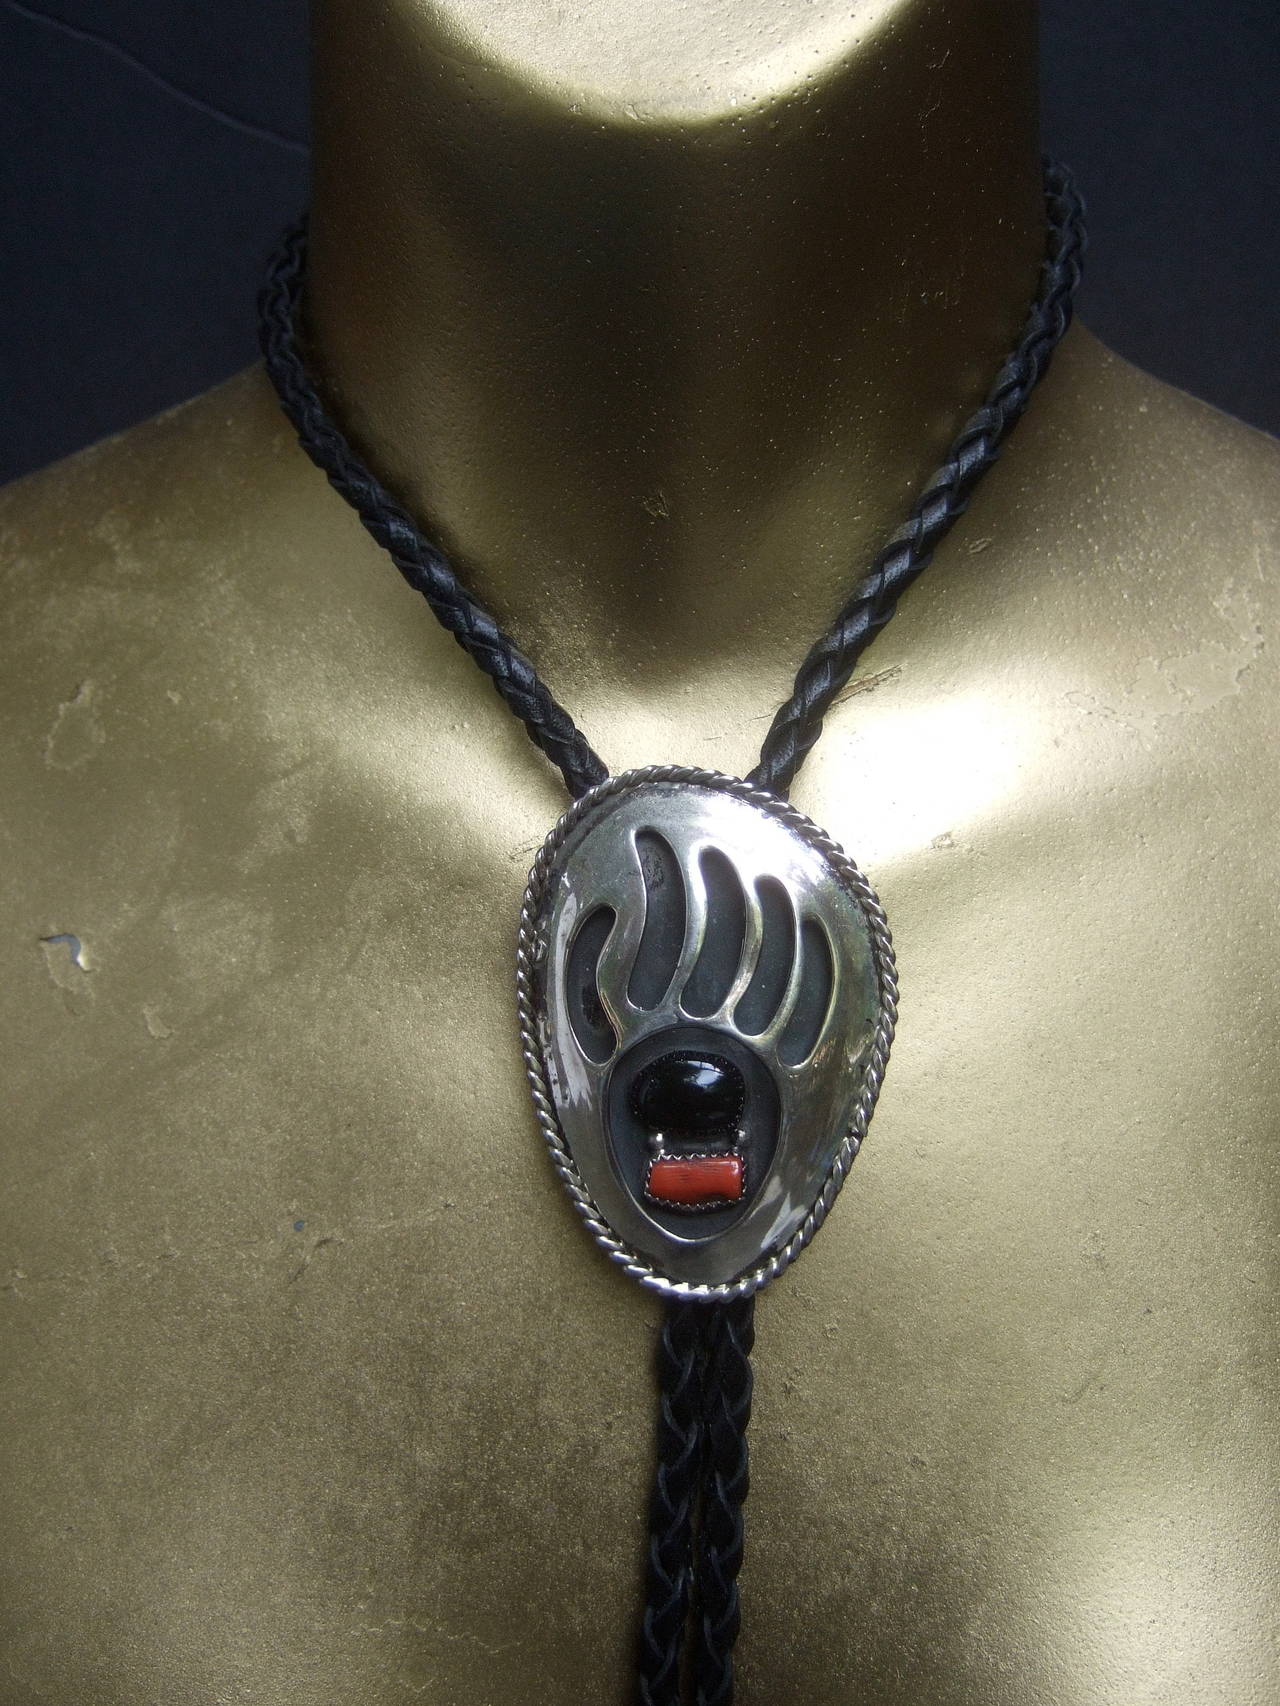 Sterling coral and jet bear claw bolo tie c 1970s
The southwestern artisan bolo tie is designed
with a sterling oval shaped pendant

The sterling bolo is designed with a coral
and oval shaped jet cabochon. The sterling
bolo pendant has cut out